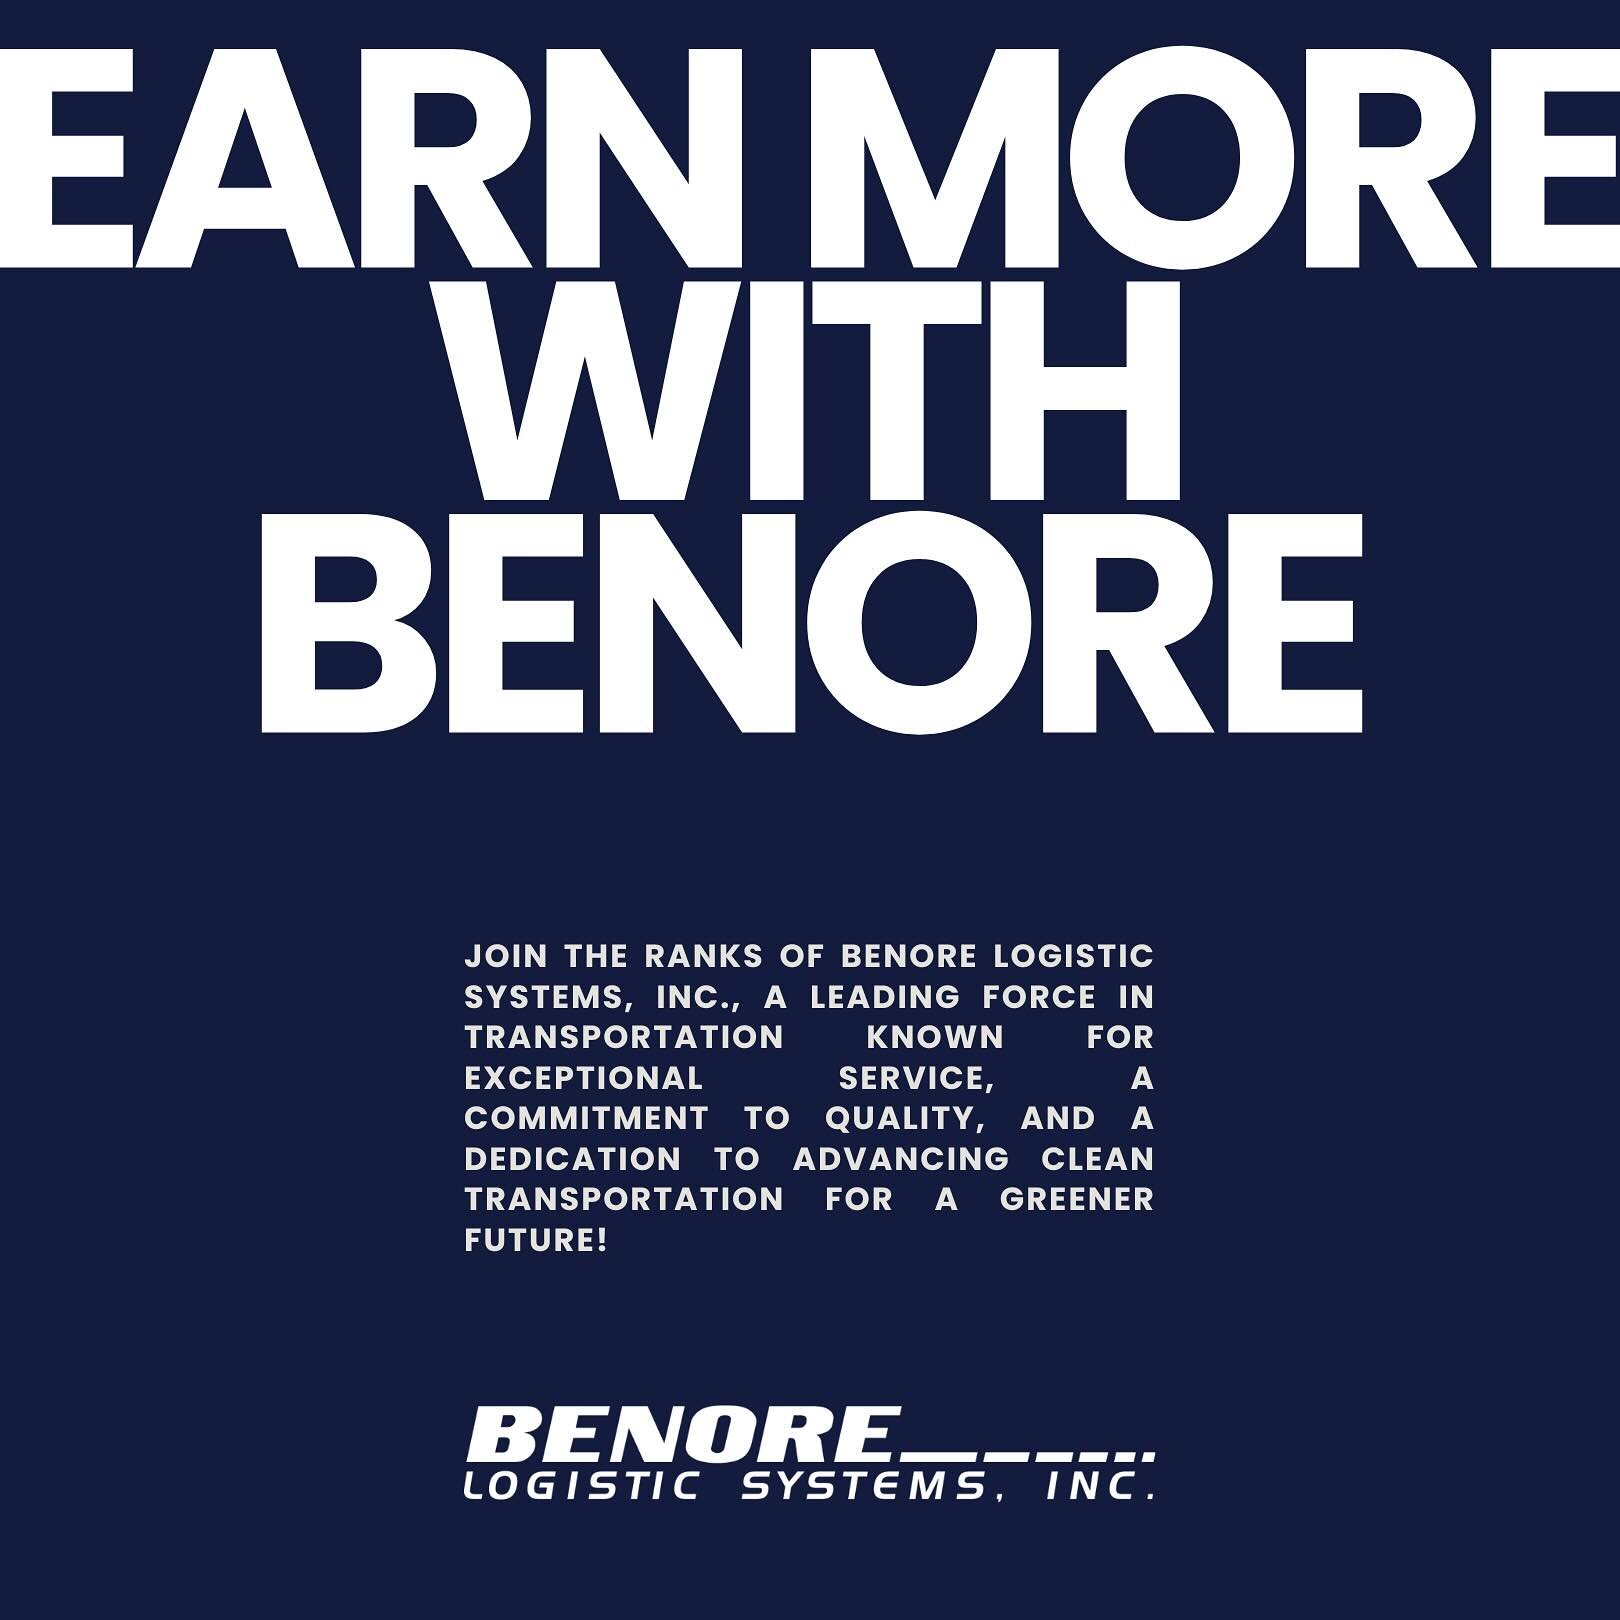 Join the ranks of Benore Logistic Systems, Inc., a leading force in logistics known for exceptional service, a commitment to quality, and a dedication to advancing clean transportation for a greener future!

At Benore, you&rsquo;ll earn: Competitive 